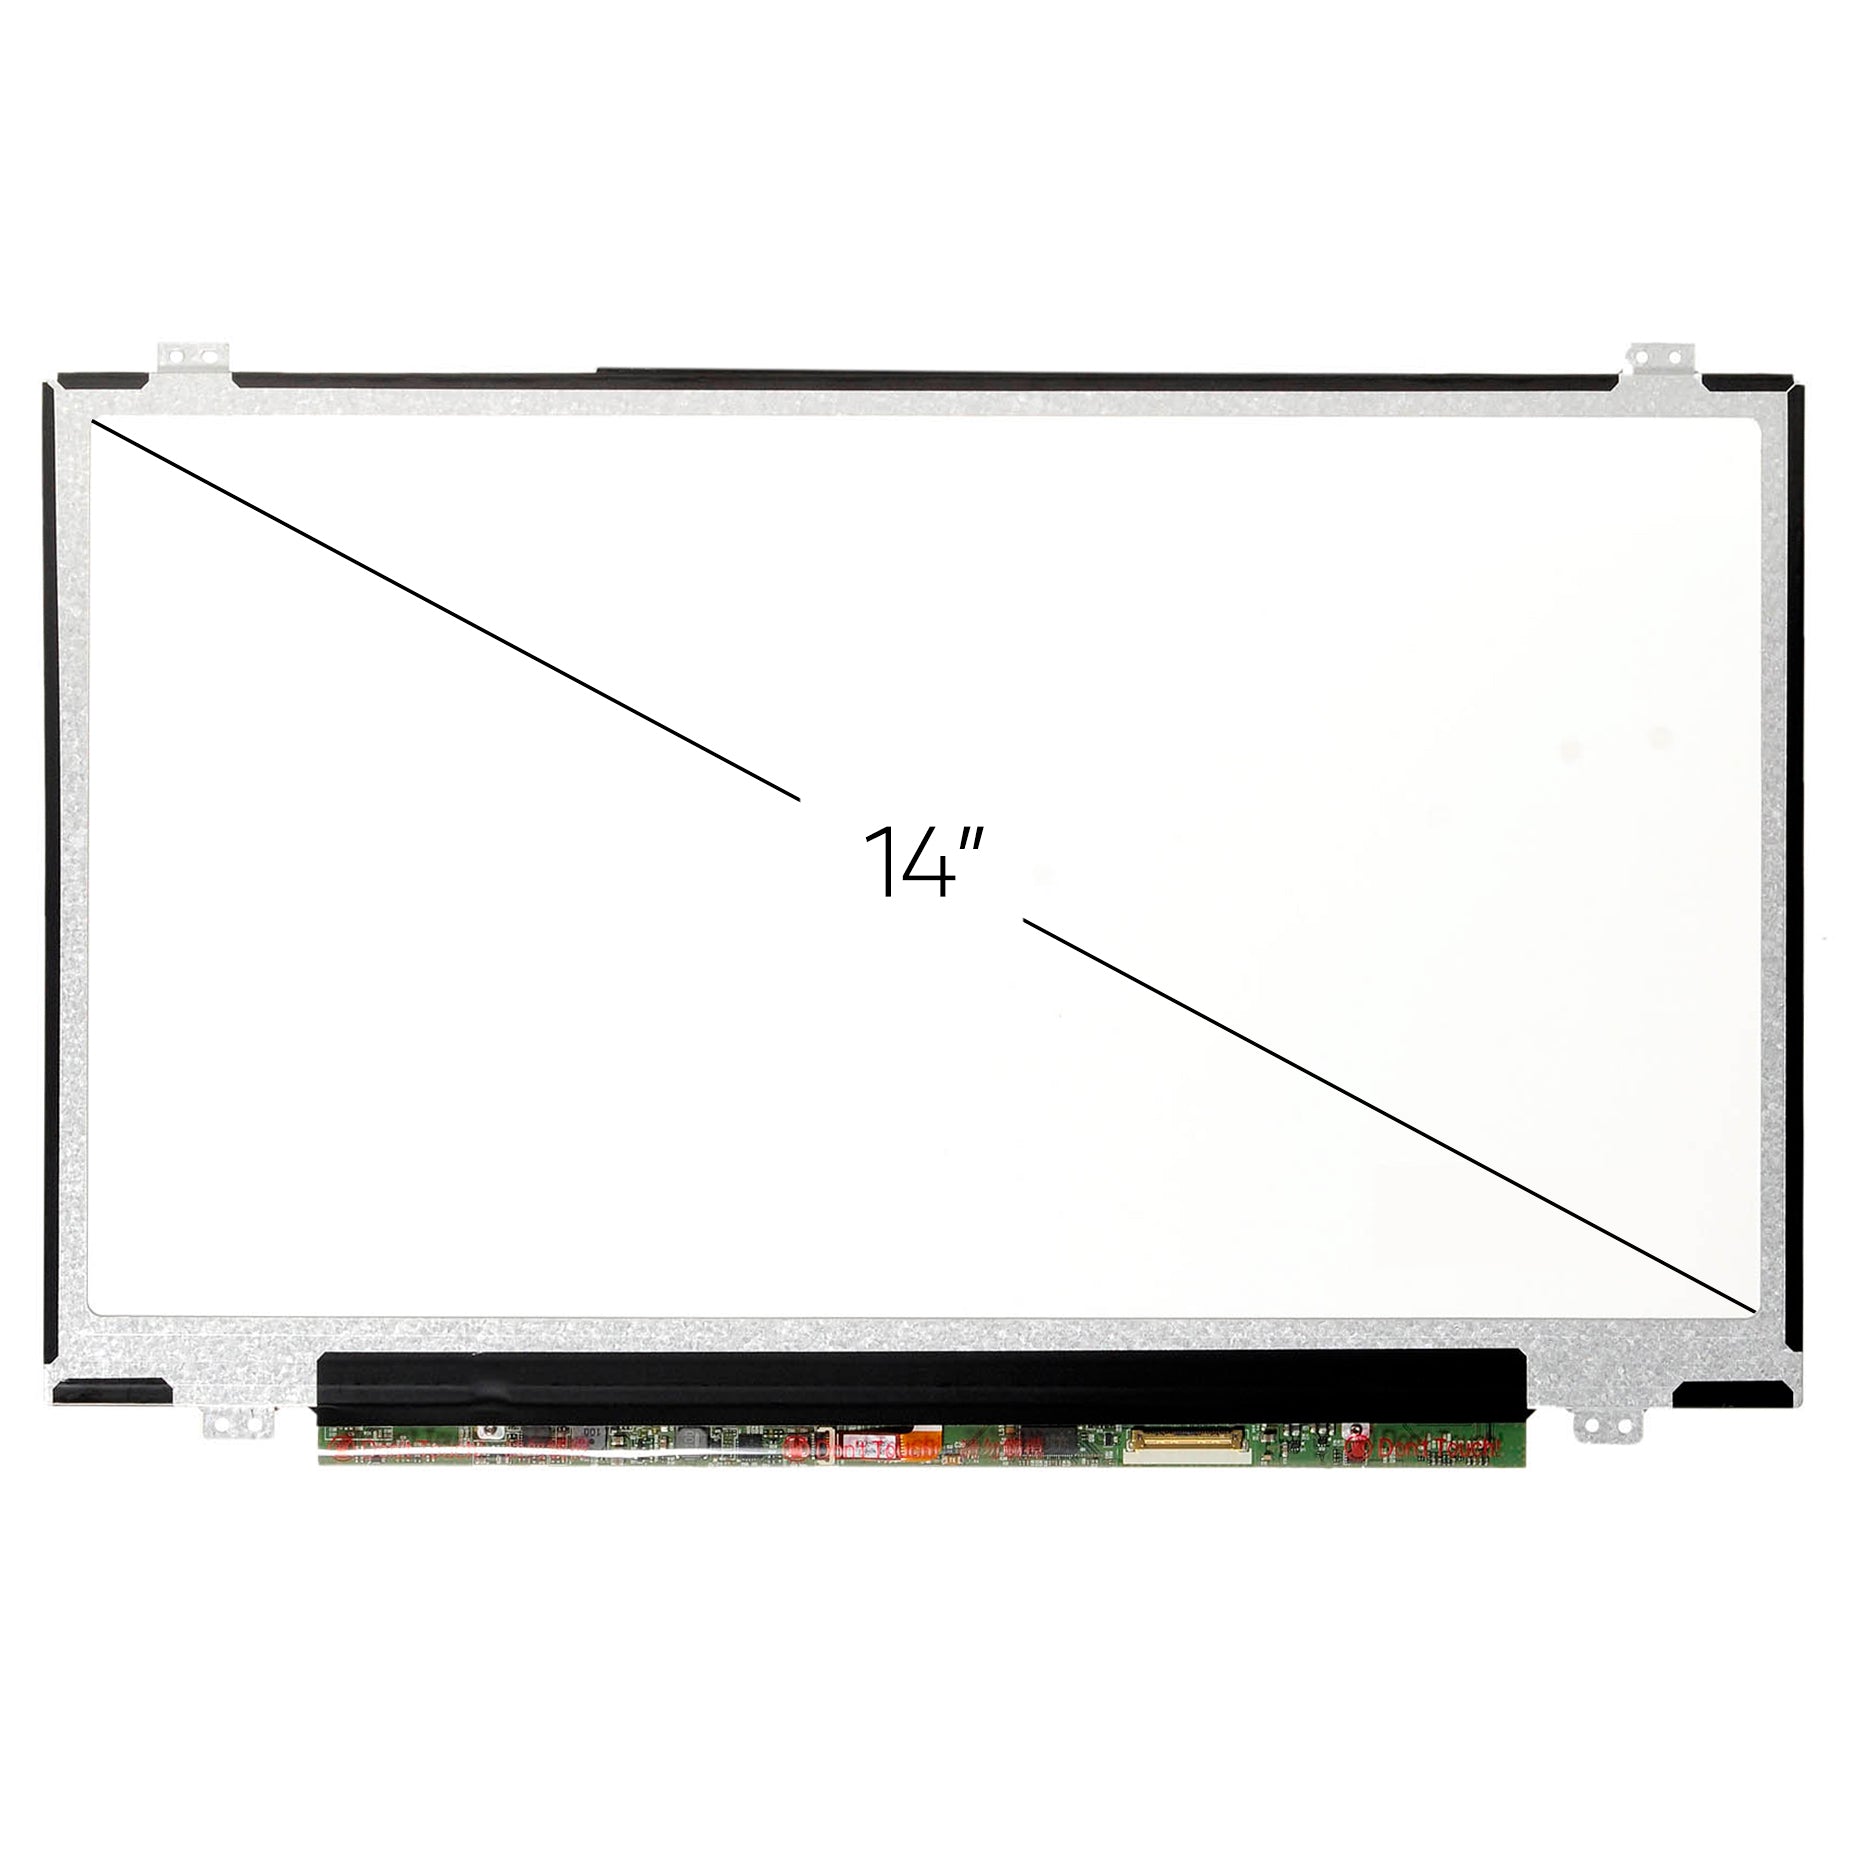 Screen Replacement for Dell Latitude E7470 FHD 1920x1080 Matte LCD LED Display